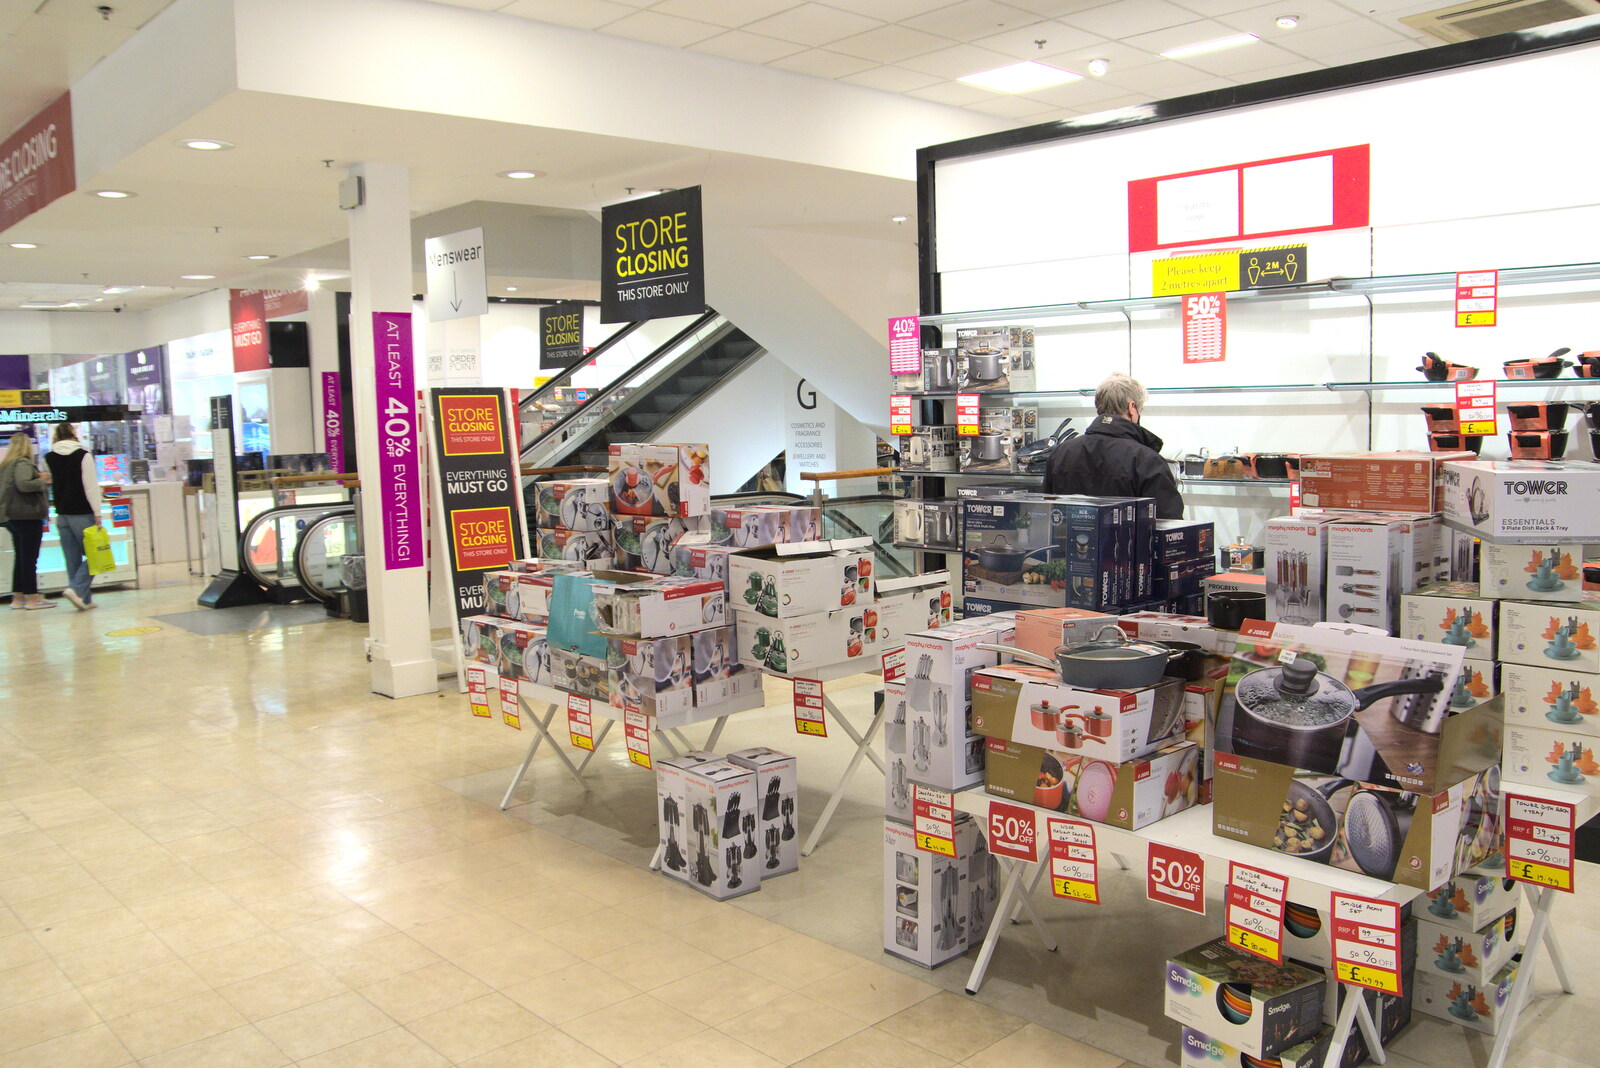 Some kitchenware is on sale from The Death of Debenhams, Rampant Horse Street, Norwich, Norfolk - 17th April 2021